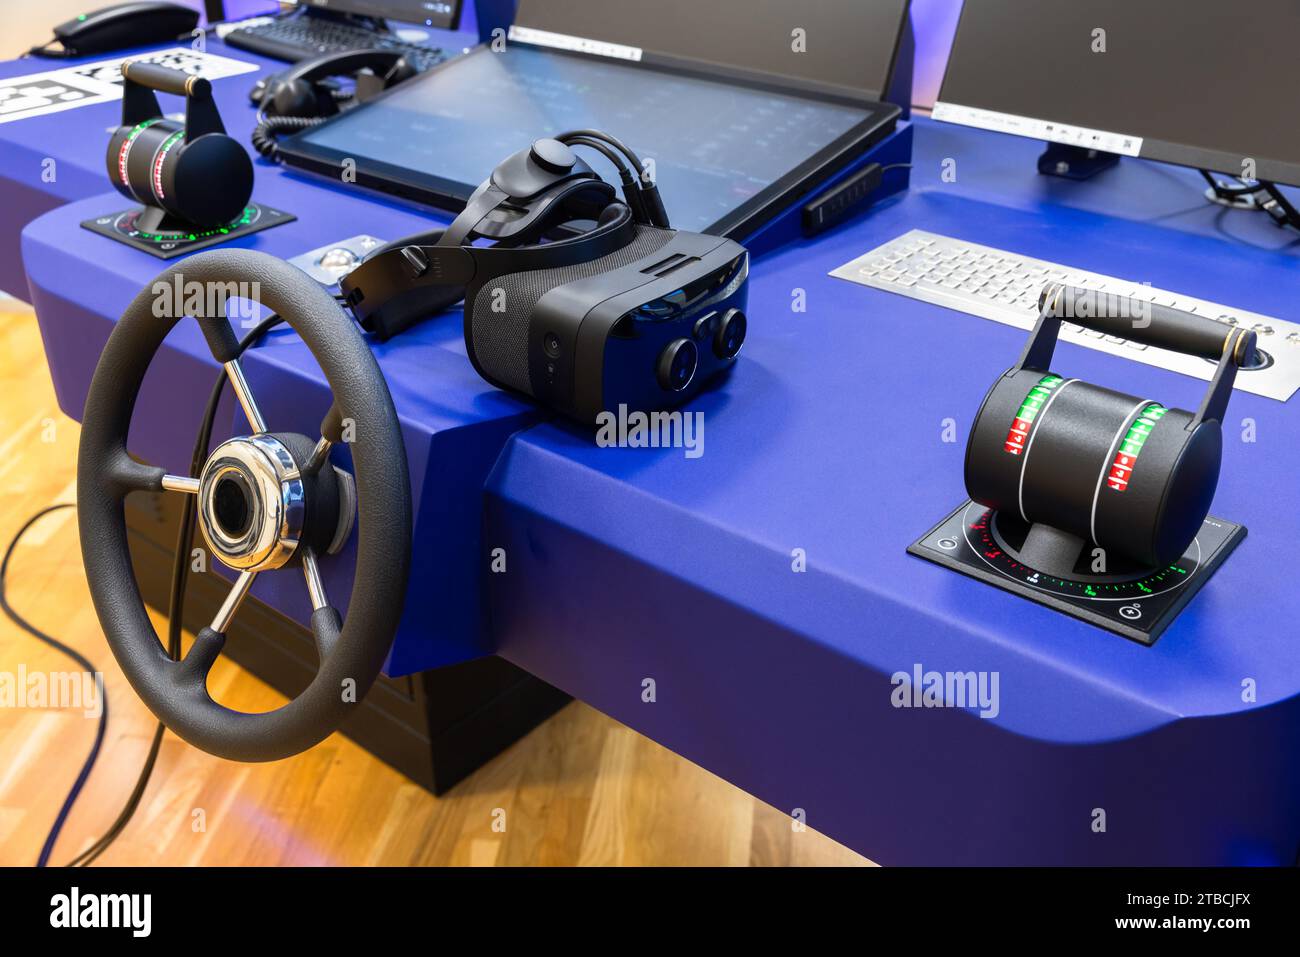 Marine navigation simulation system, ship control panel with steering wheel and Virtual reality headset Stock Photo